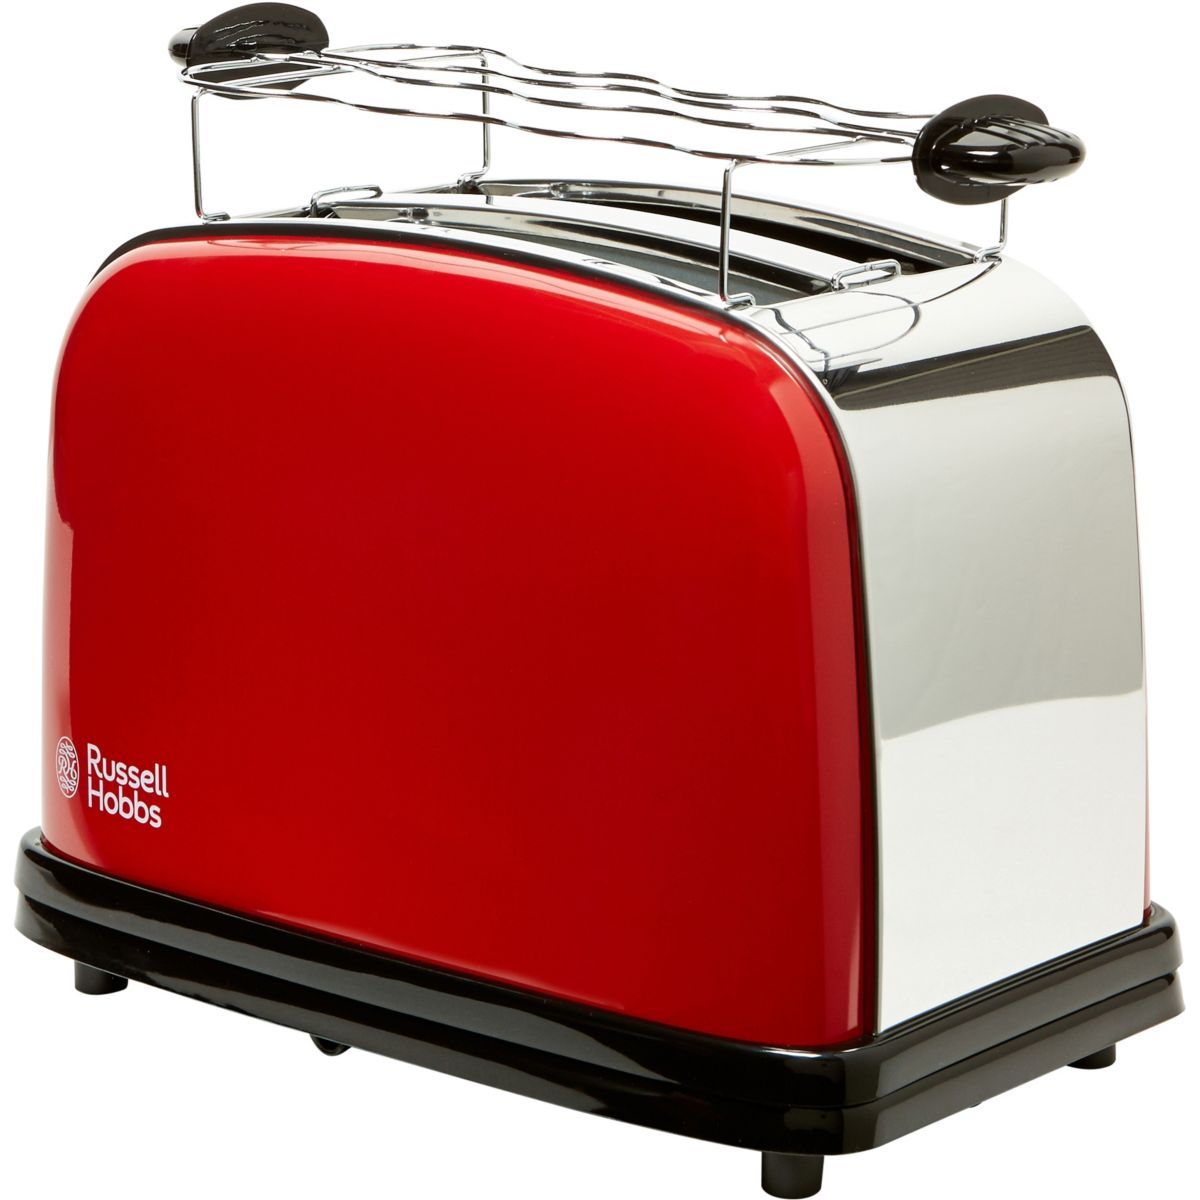 Grille-pain Colors Plus Russell Hobbs - Rouge - 26554-56